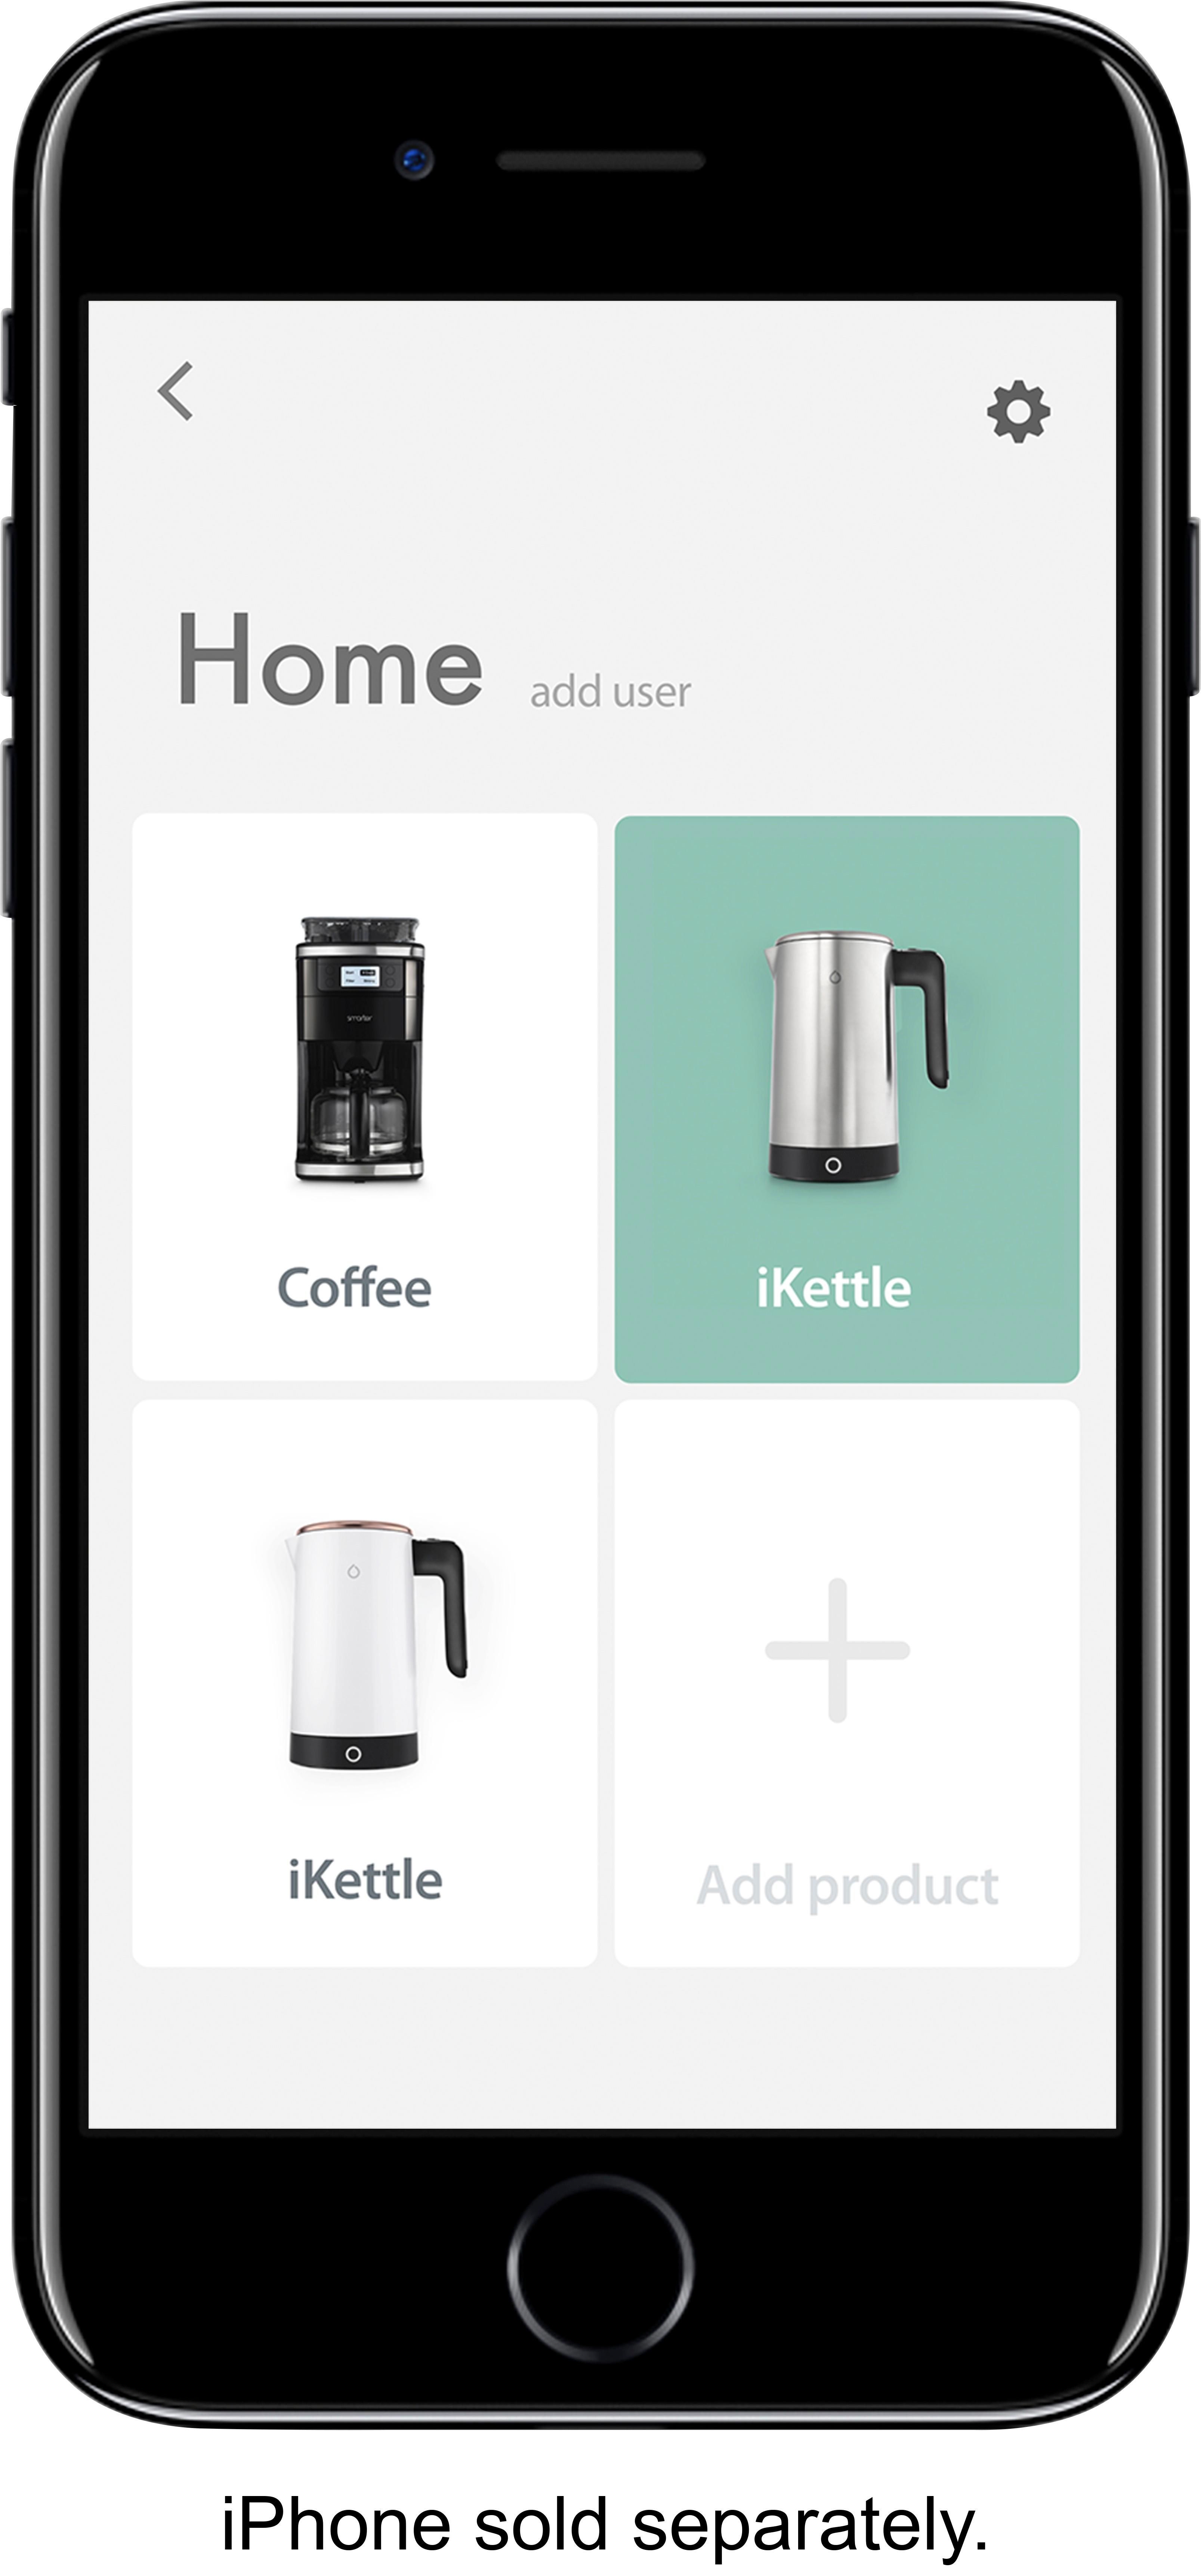 Smarter - The iKettle Monochrome is now back in stock. When it's time for a  hot drink, you'll want a smart kettle that's up for the job. Make sure  yours is energy-efficient